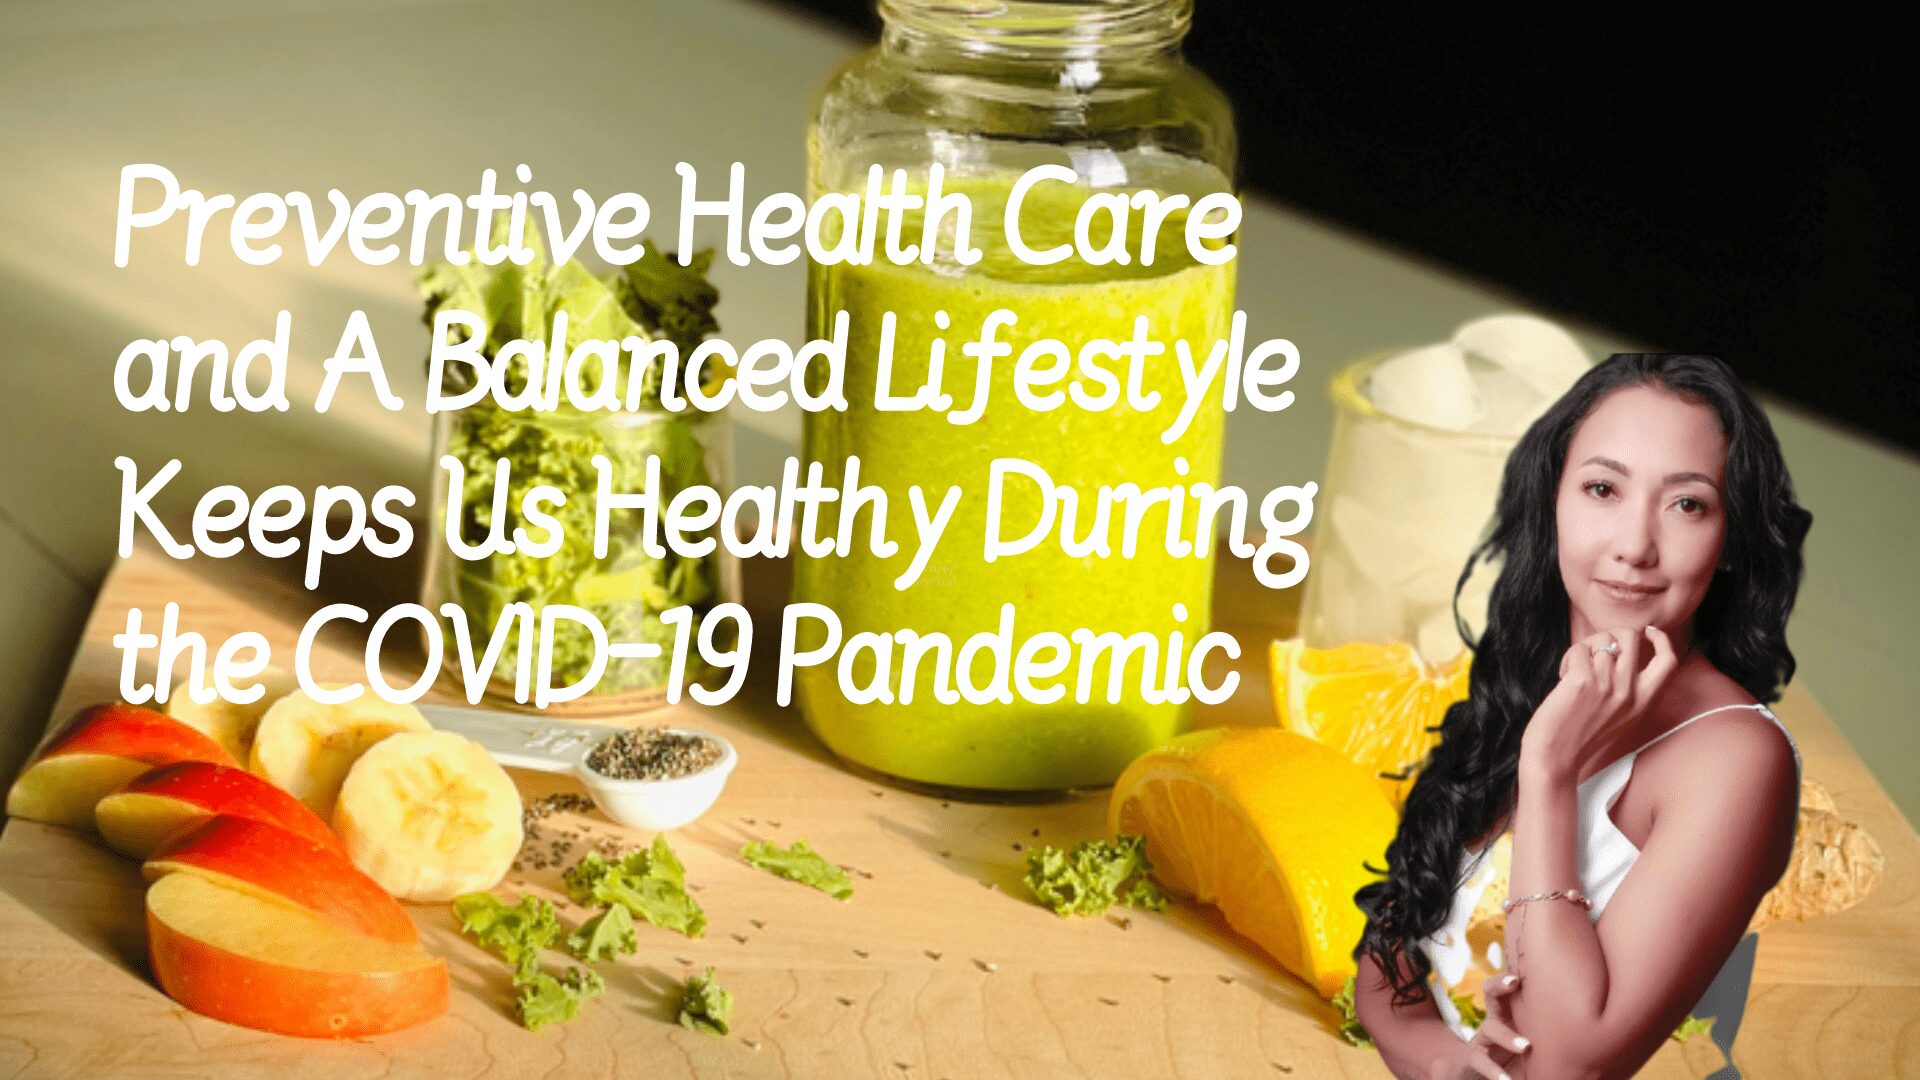 Preventive health care and a balanced lifestyle keep us healthy during the COVID-19 pandemic_Mans International